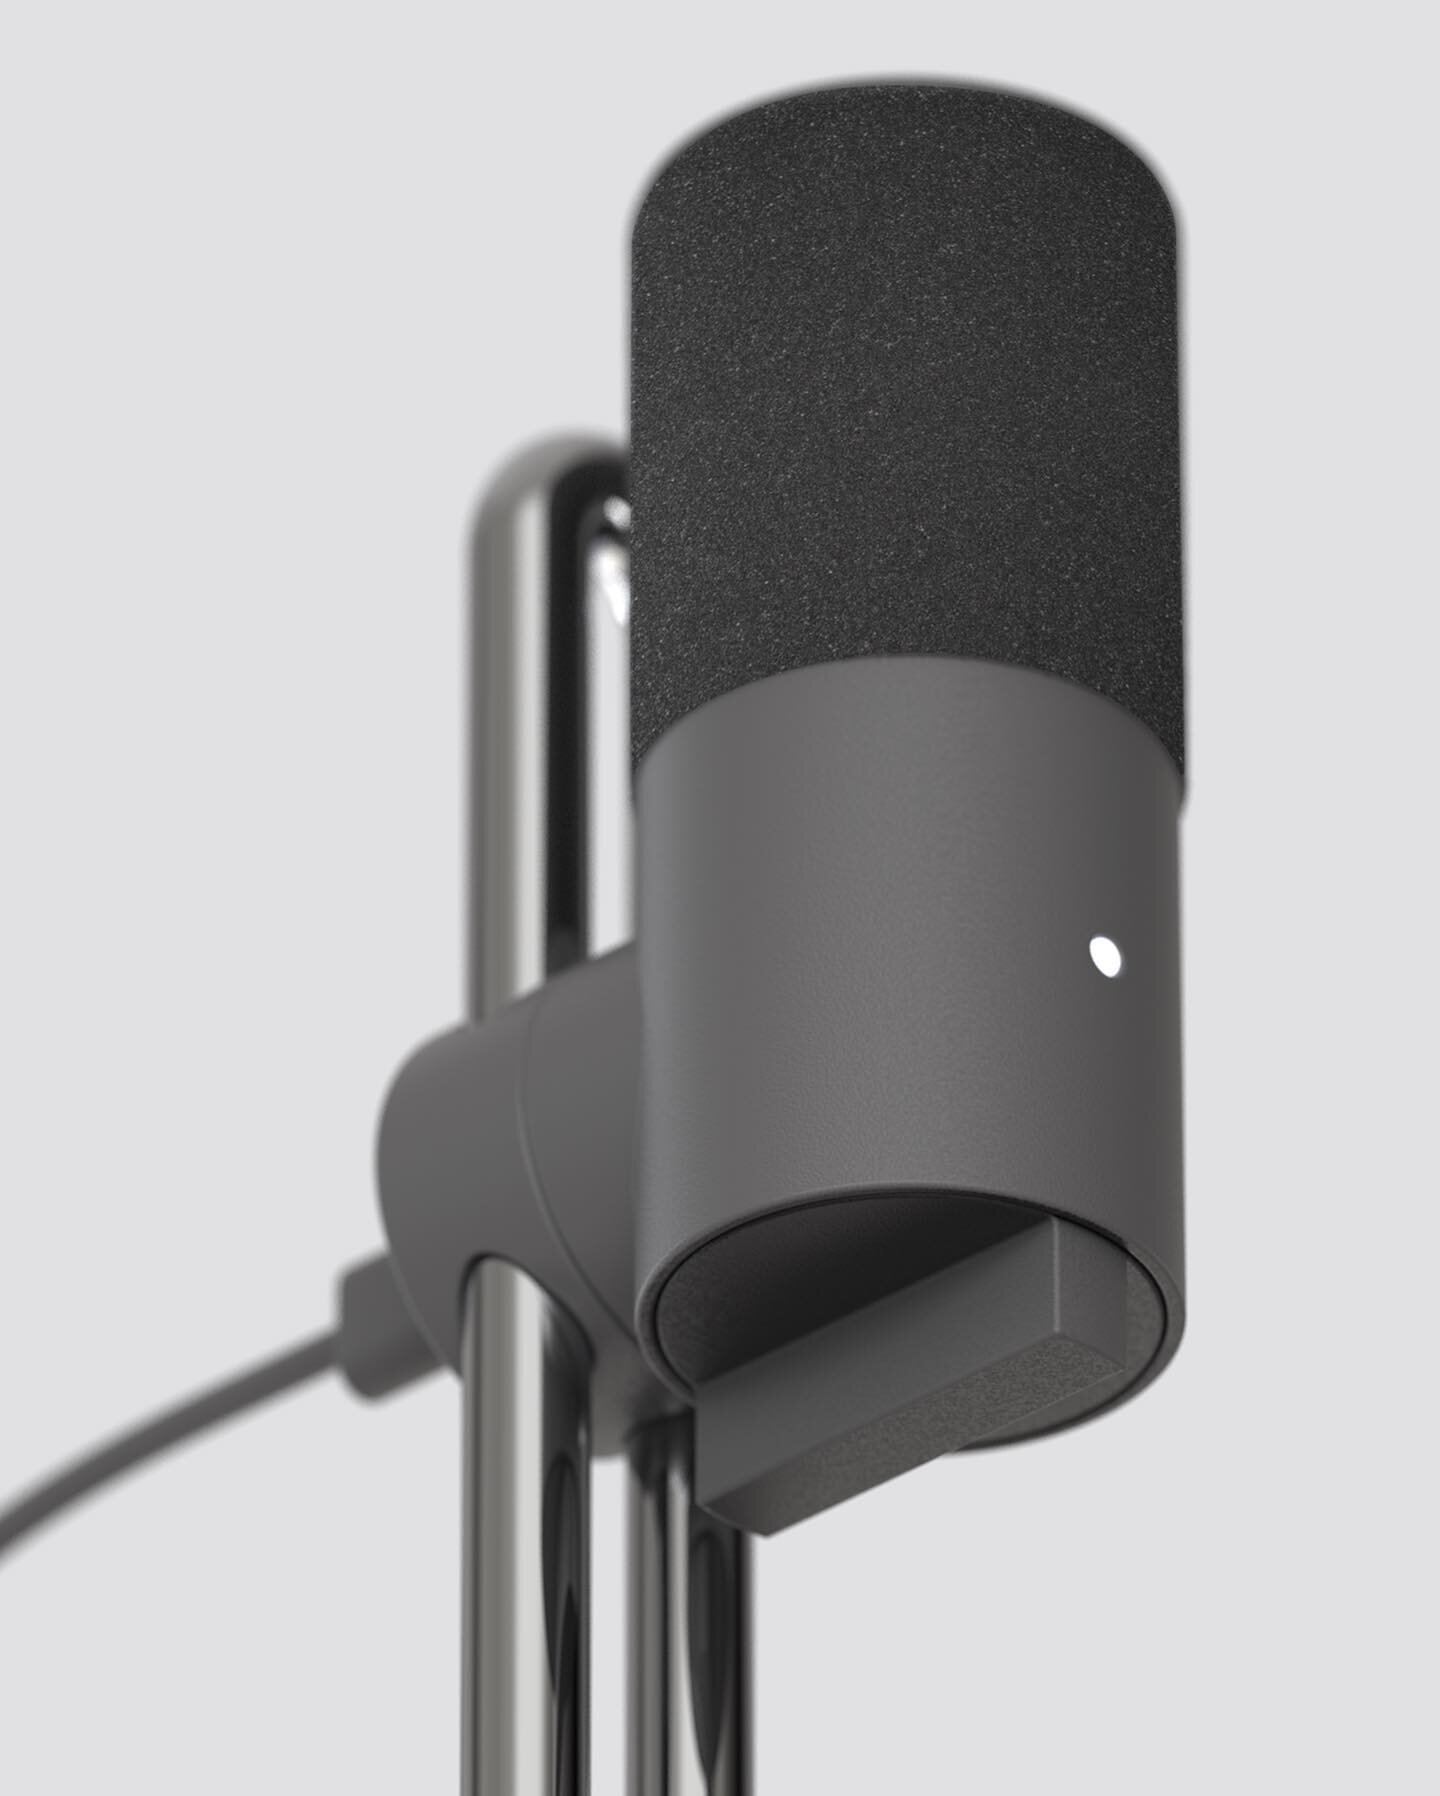 My entry for this week&rsquo;s #renderweekly #rwmic challenge was to envision a @teenageengineering microphone. I love the pure, raw geometry that their products embody, and thought it might make an interesting mashup/opportunity for a desk microphon